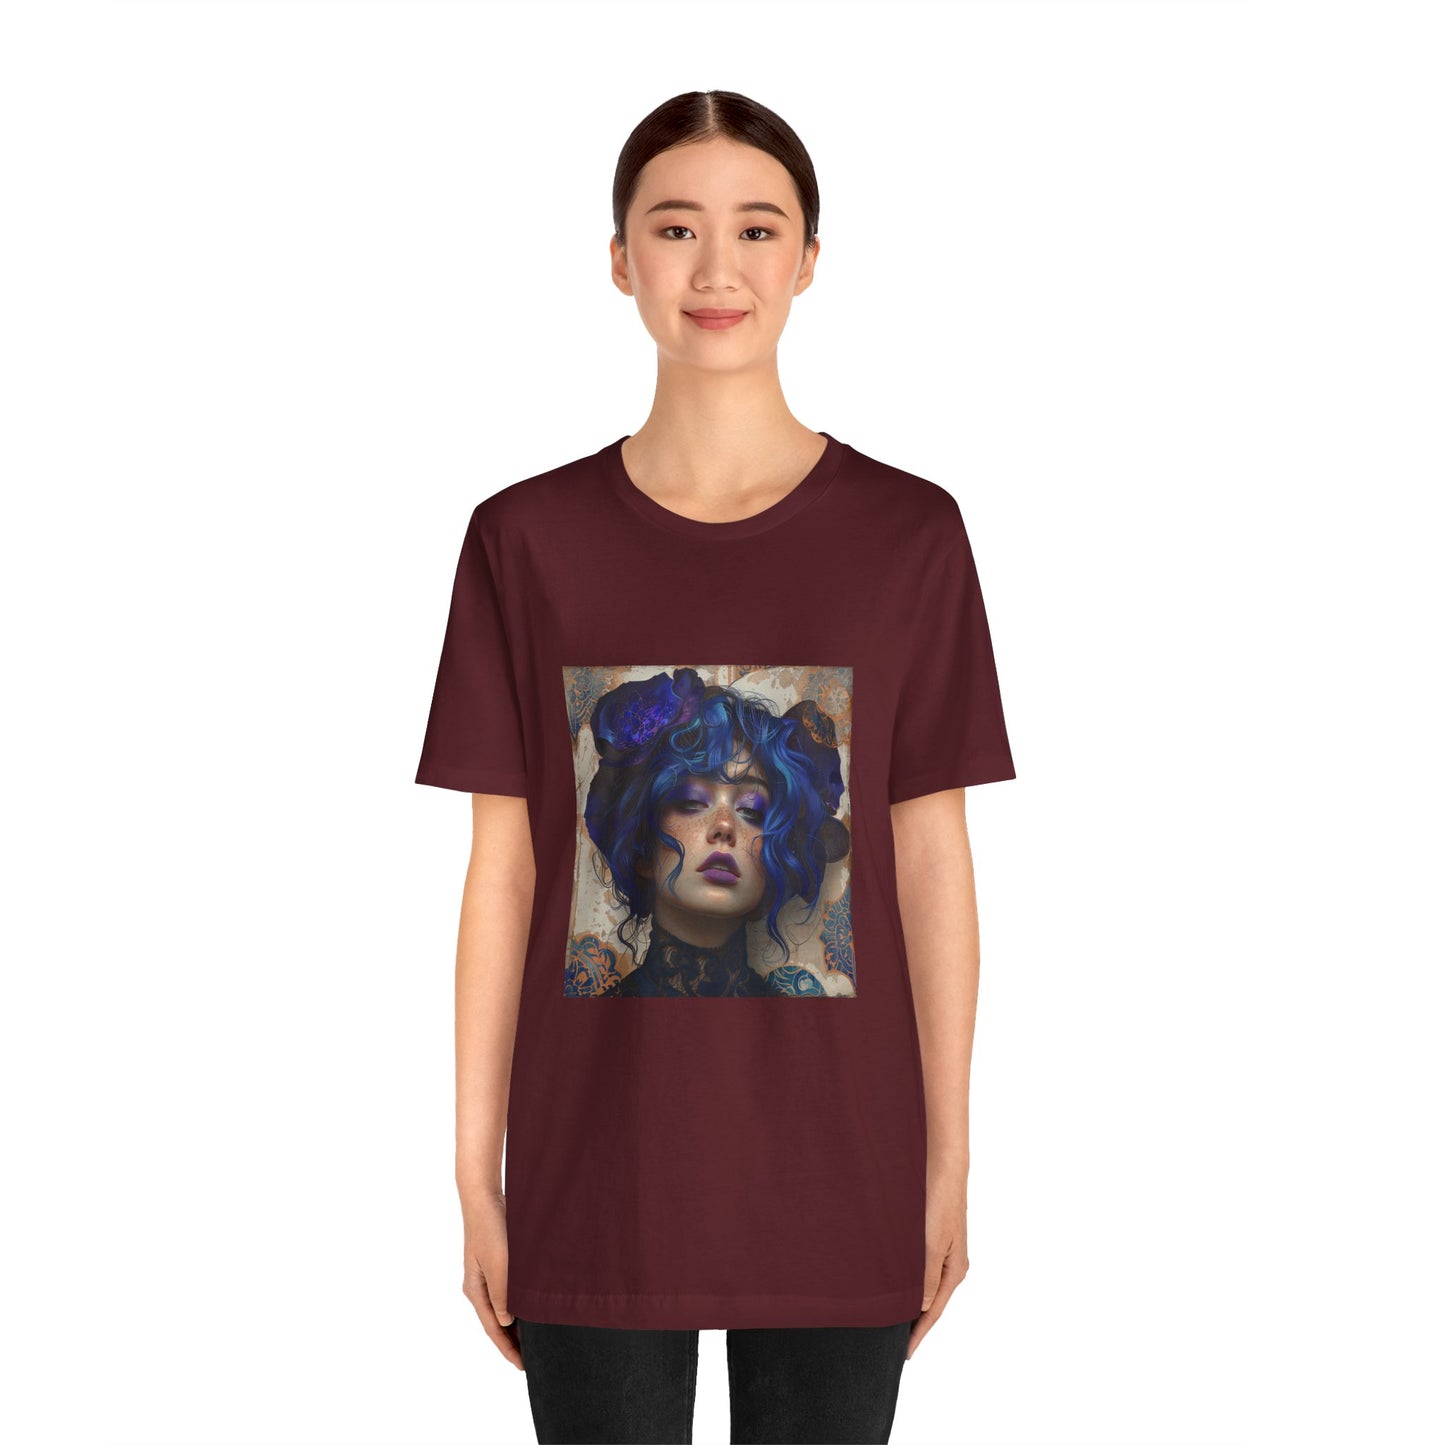 Unisex Jersey Short Sleeve Tee: lady with blue and purple hair